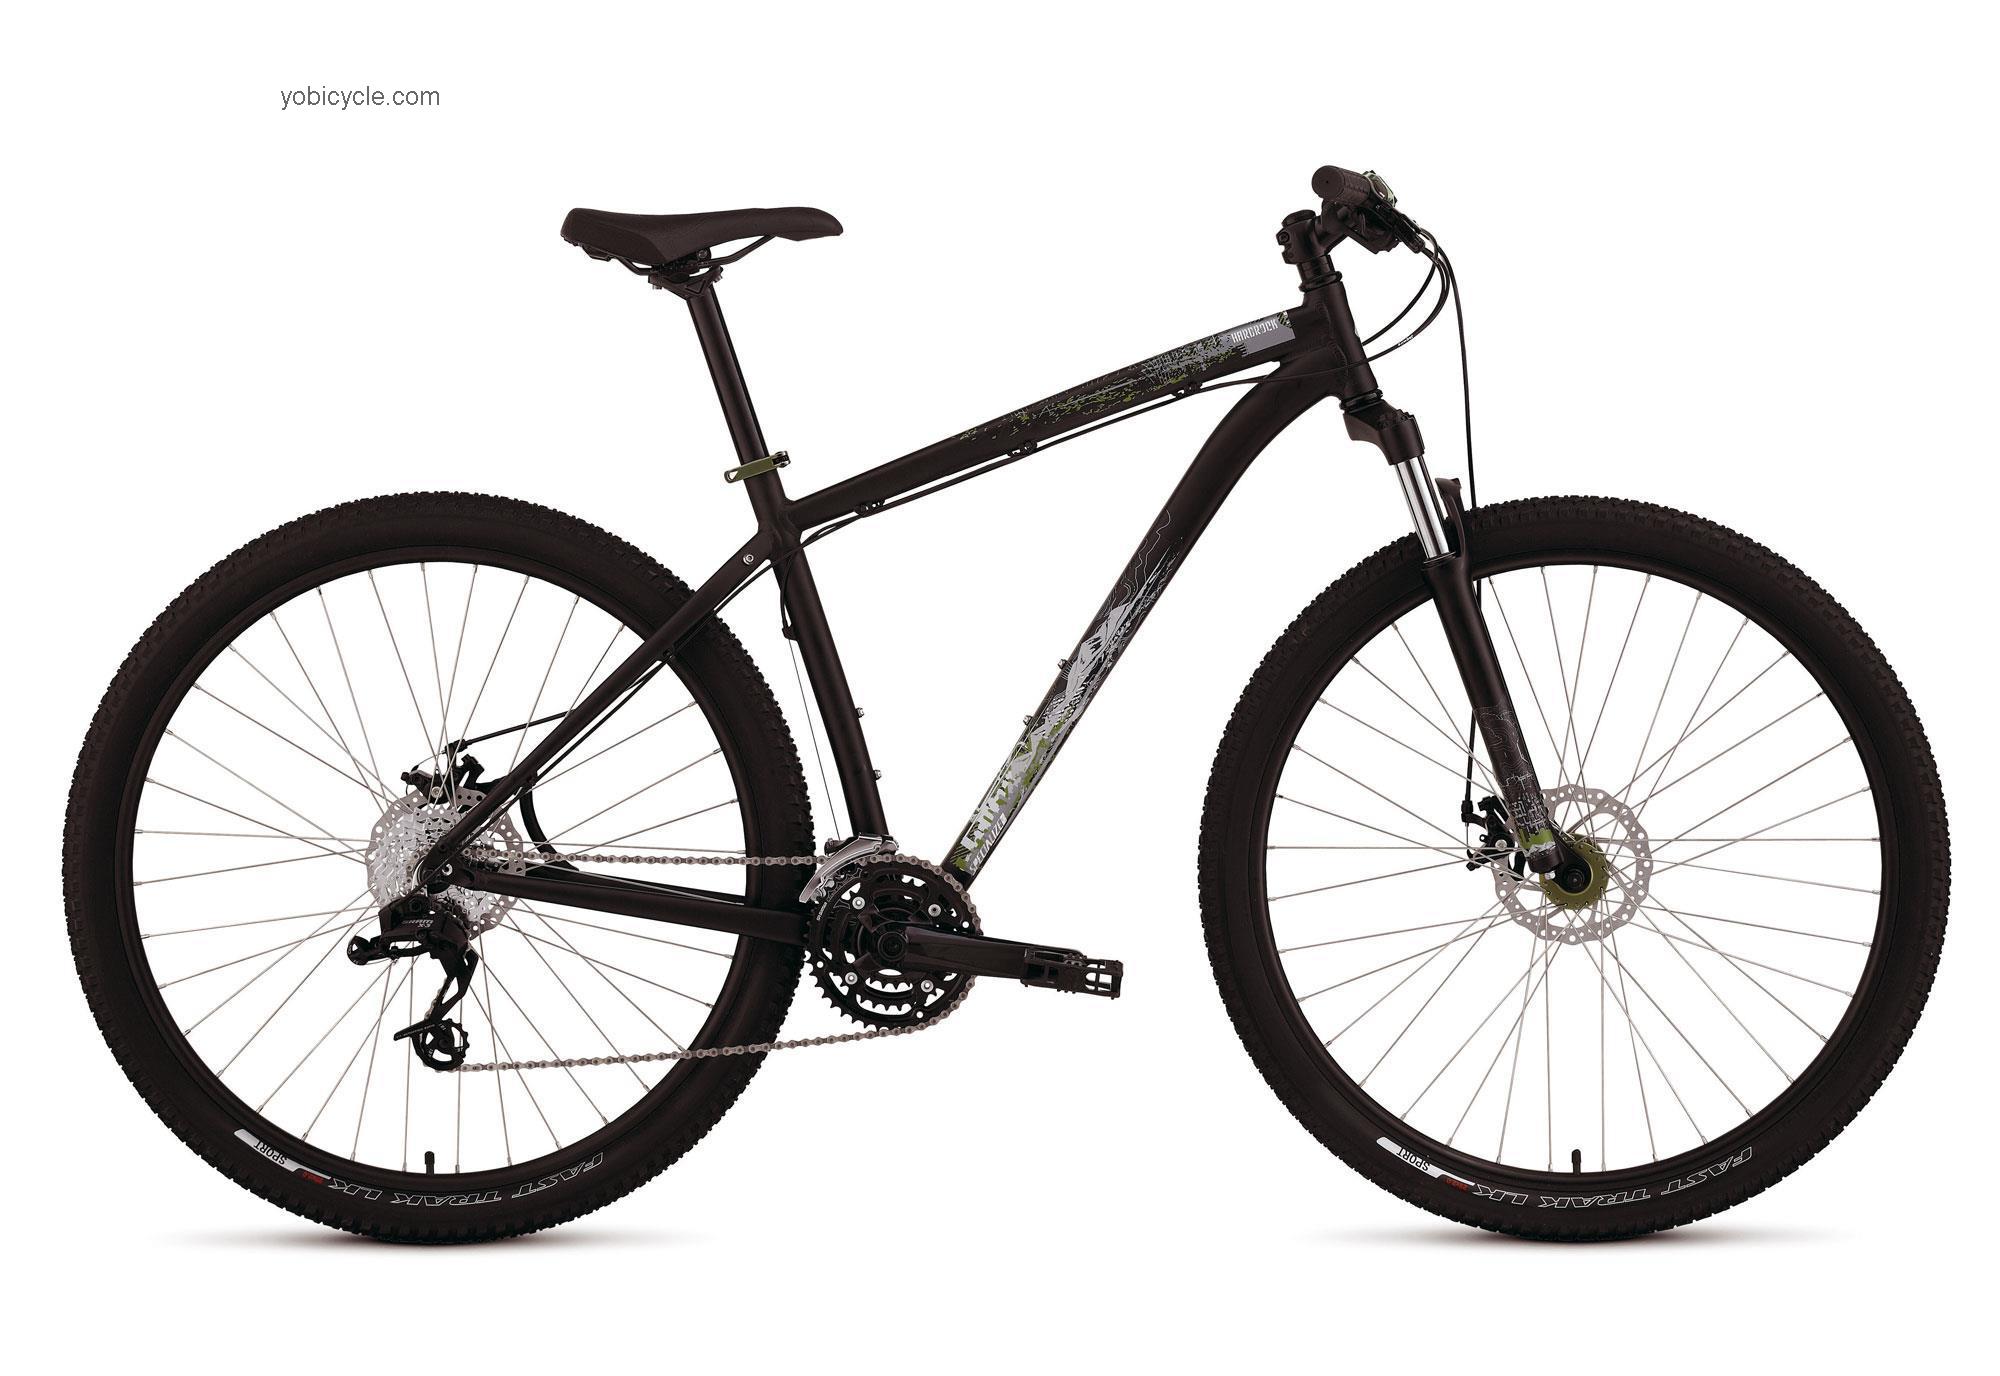 Specialized Hardrock Disc 29 2012 comparison online with competitors